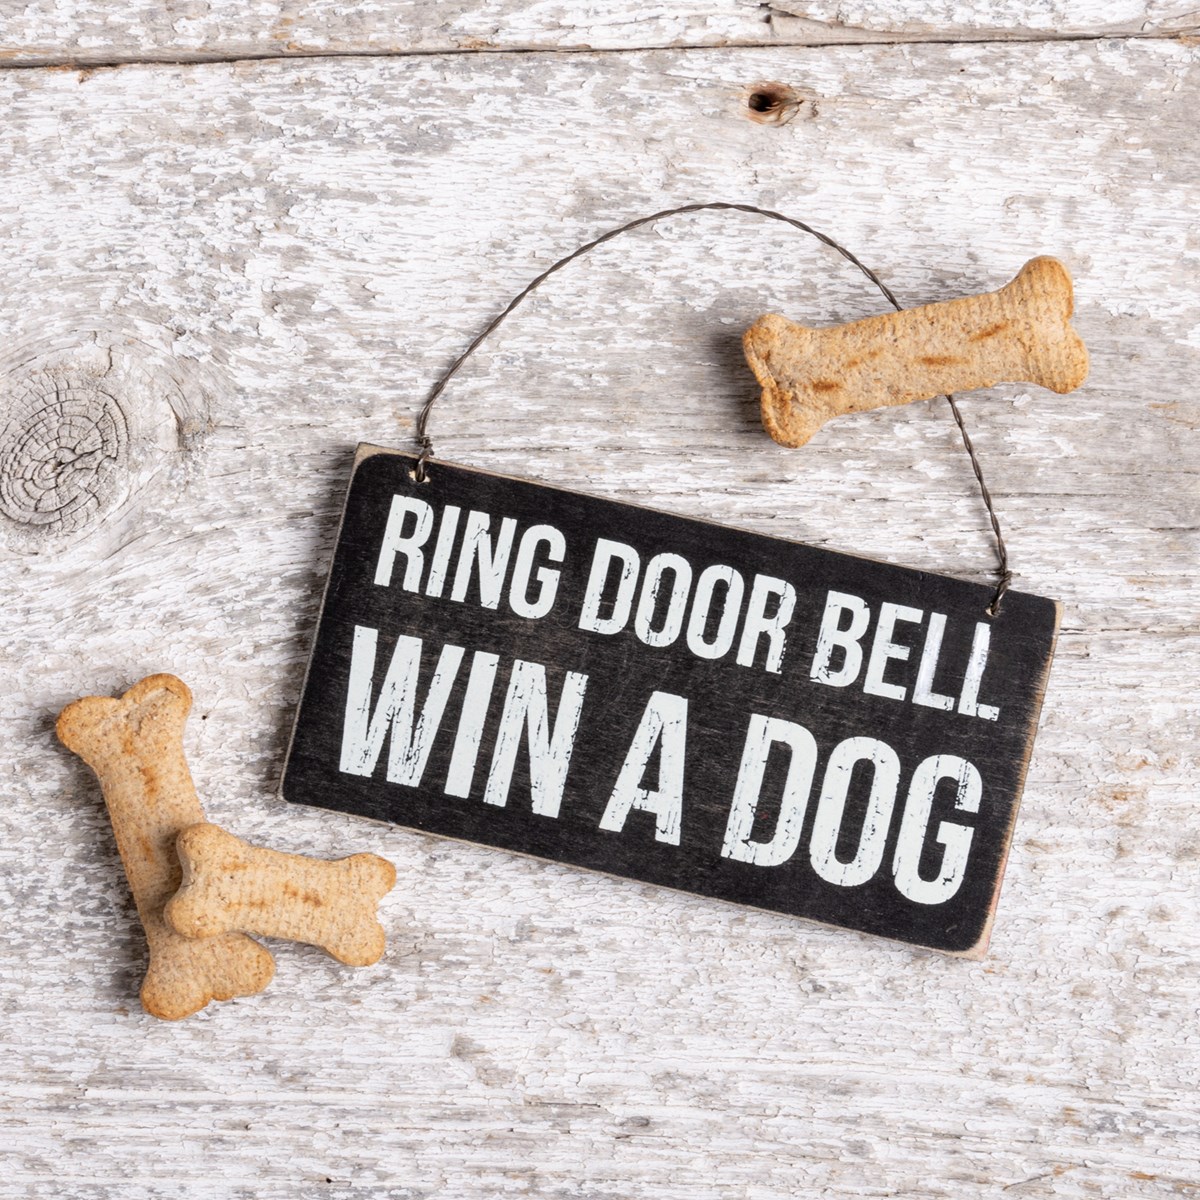 Ring Door Bell Win A Dog Ornament - Wood, Wire